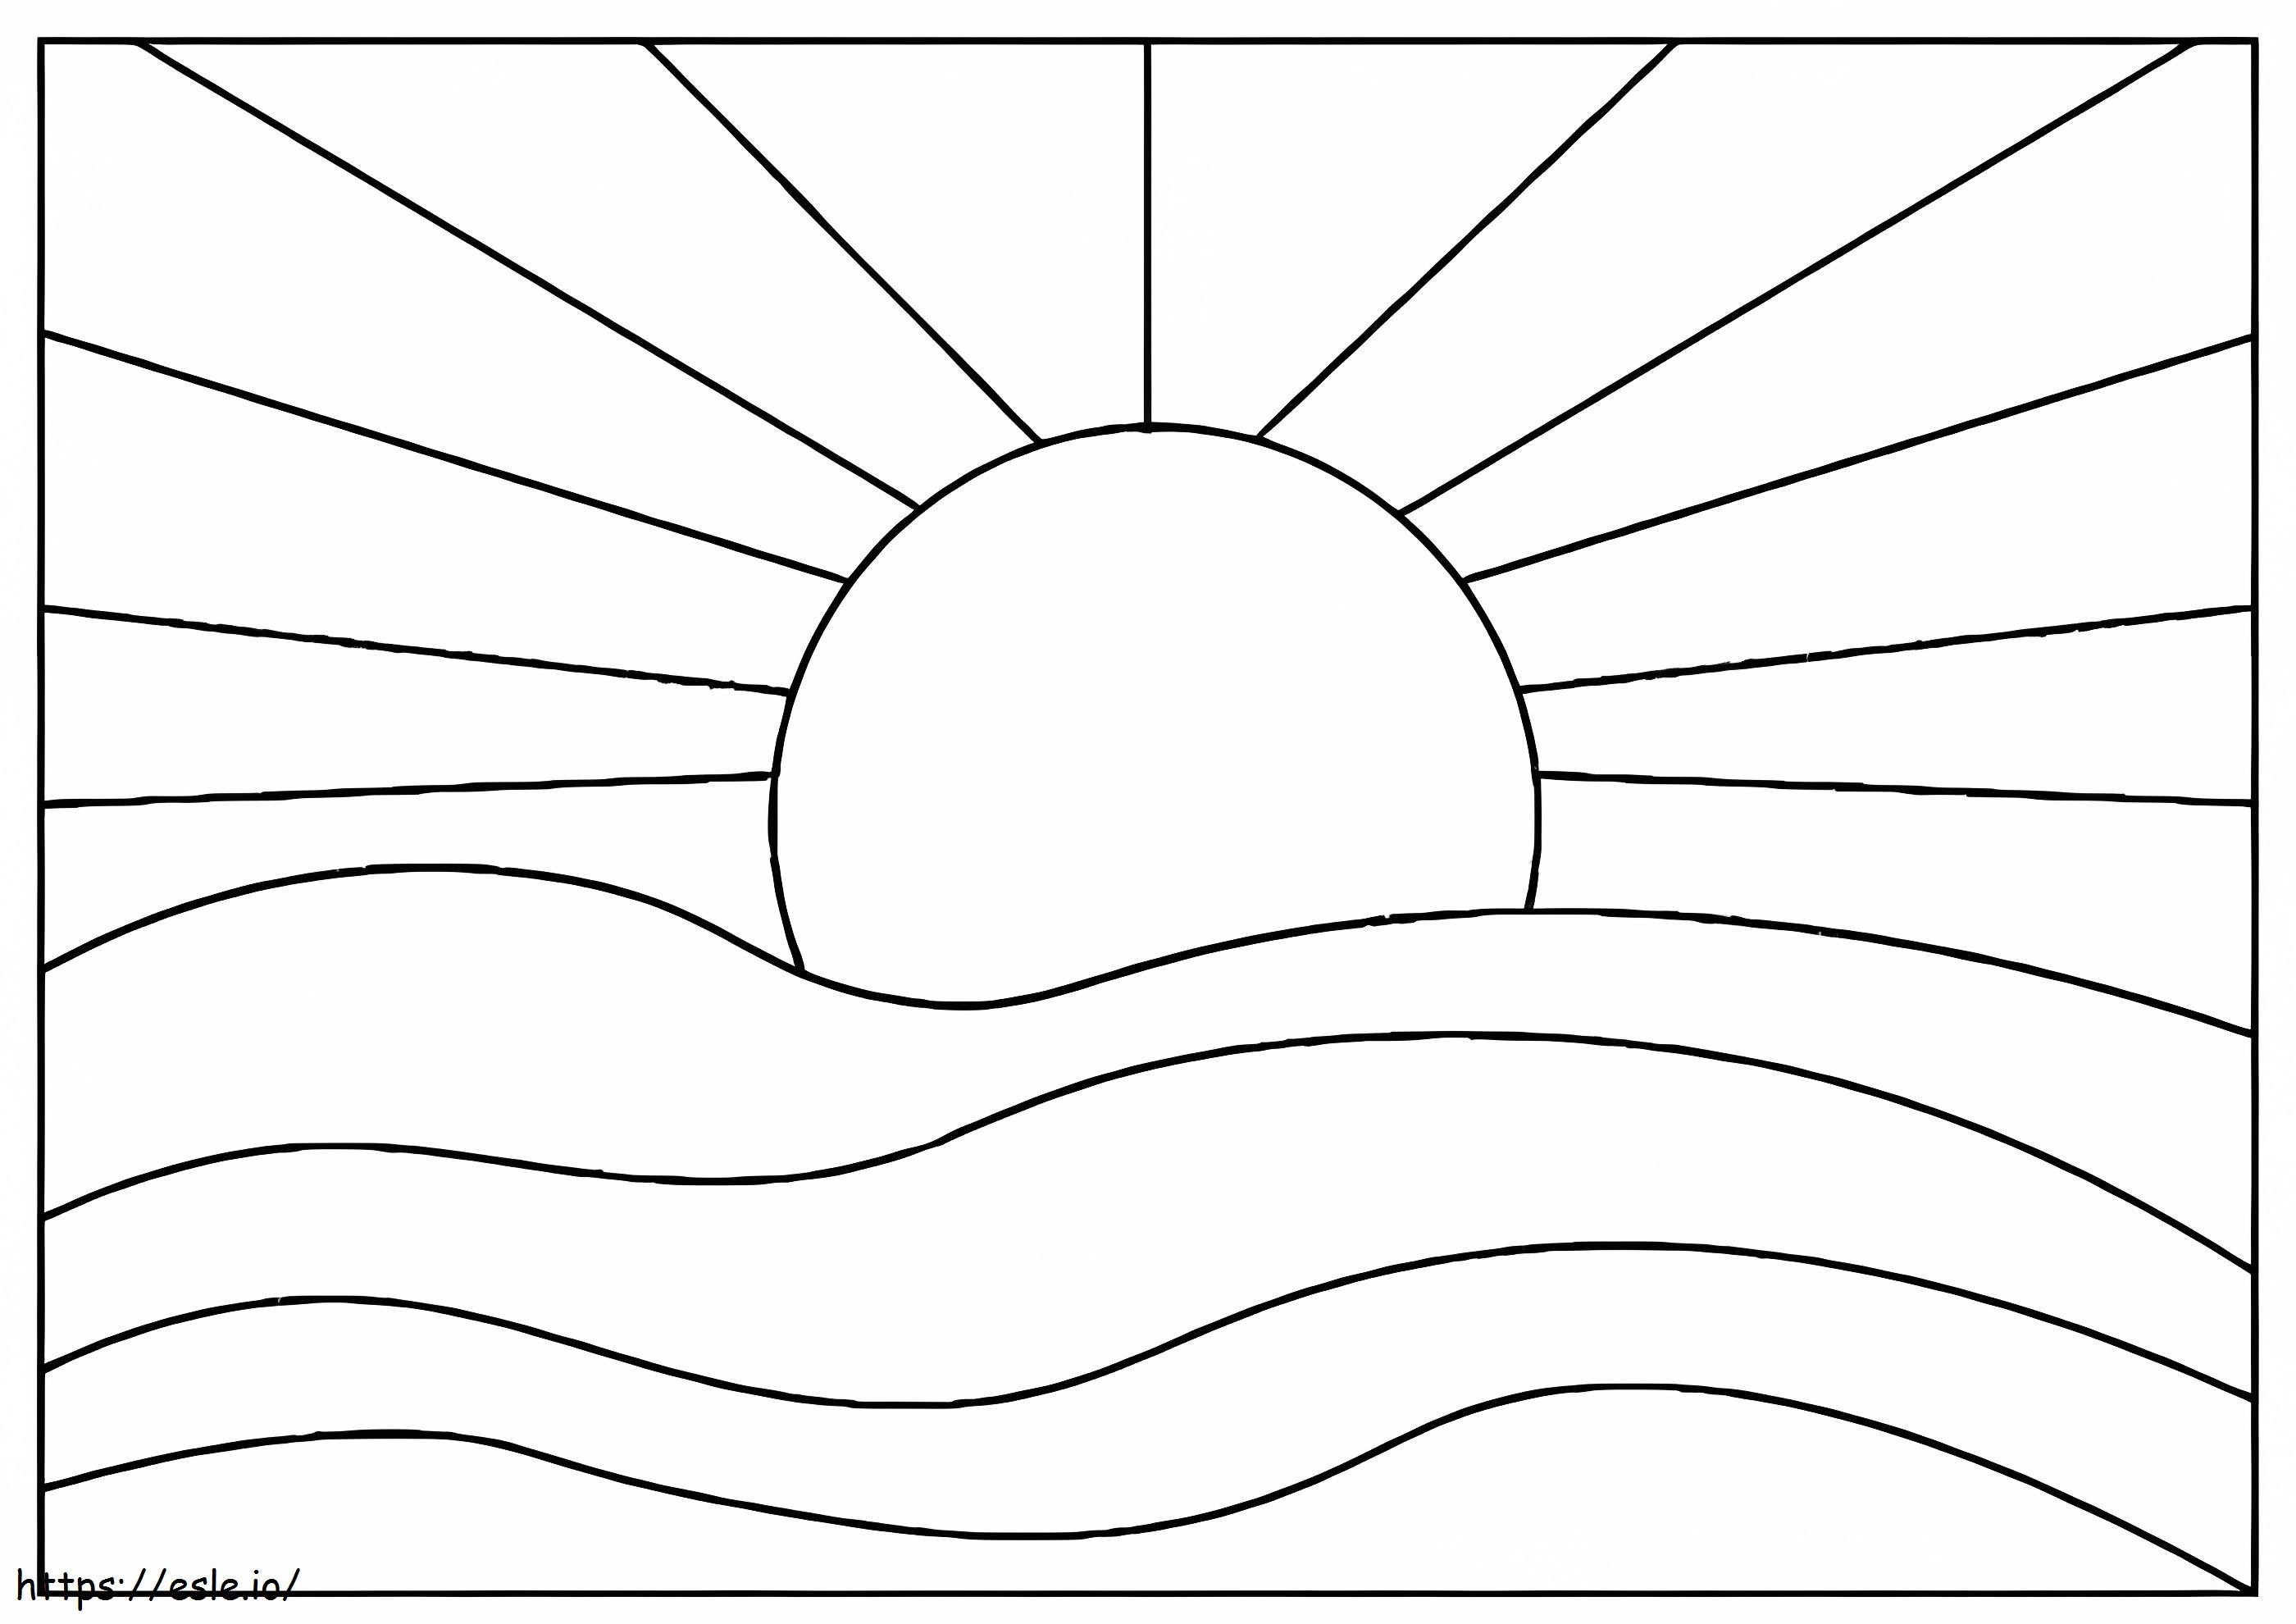 Simple Sunset Image coloring page